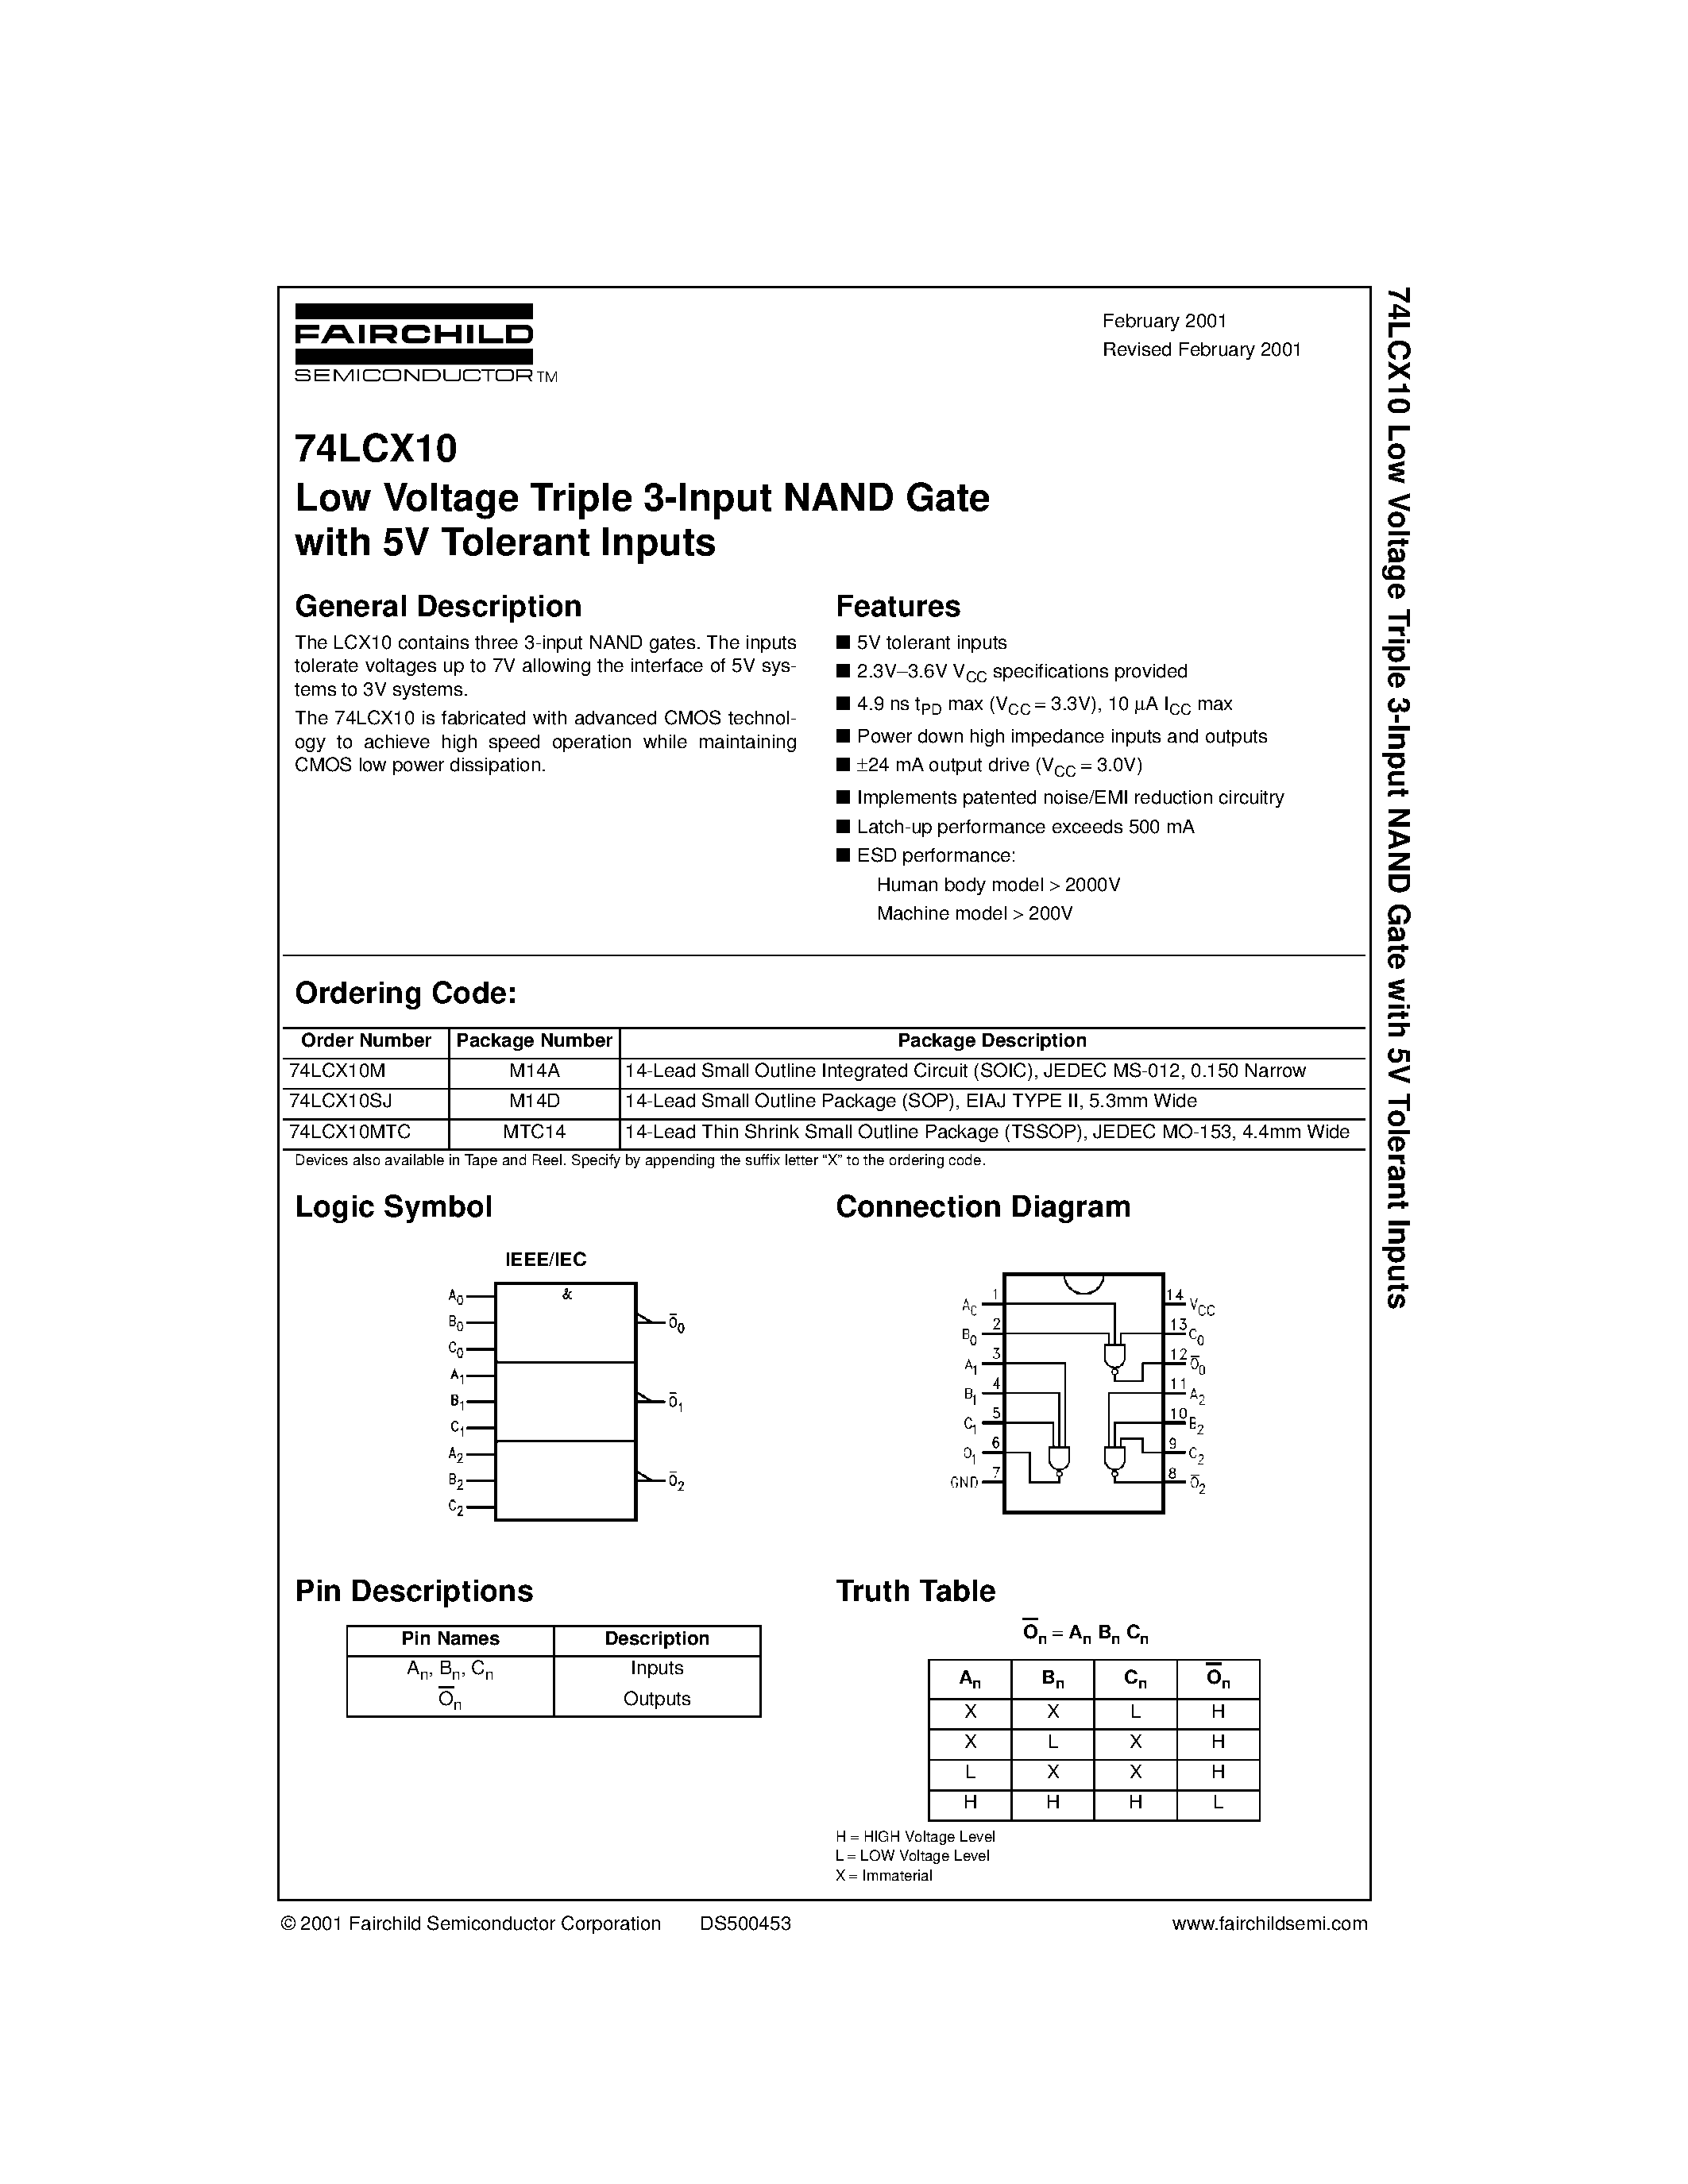 Datasheet 74LCX10MTC - Low Voltage Triple 3-Input NAND Gate with 5V Tolerant Inputs page 1